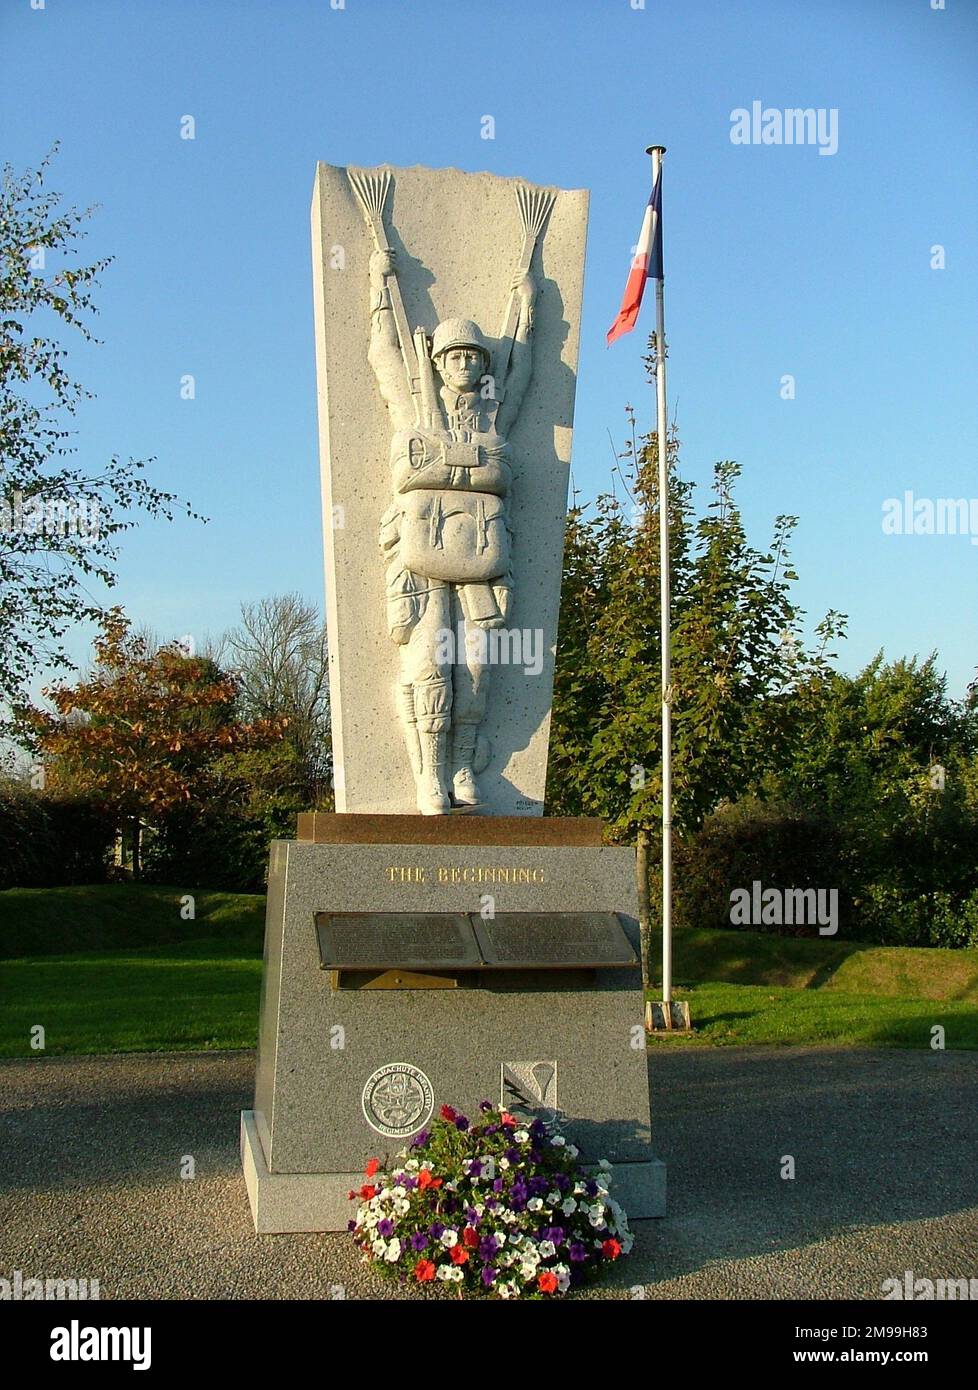 The figure stands in a Memorial Park unveiled by the Mayor on 23 July 2002. The structure is titled 'The  Beginning' and lists the medals and decorations awarded to members throughout the campaigns in Europe. Stock Photo